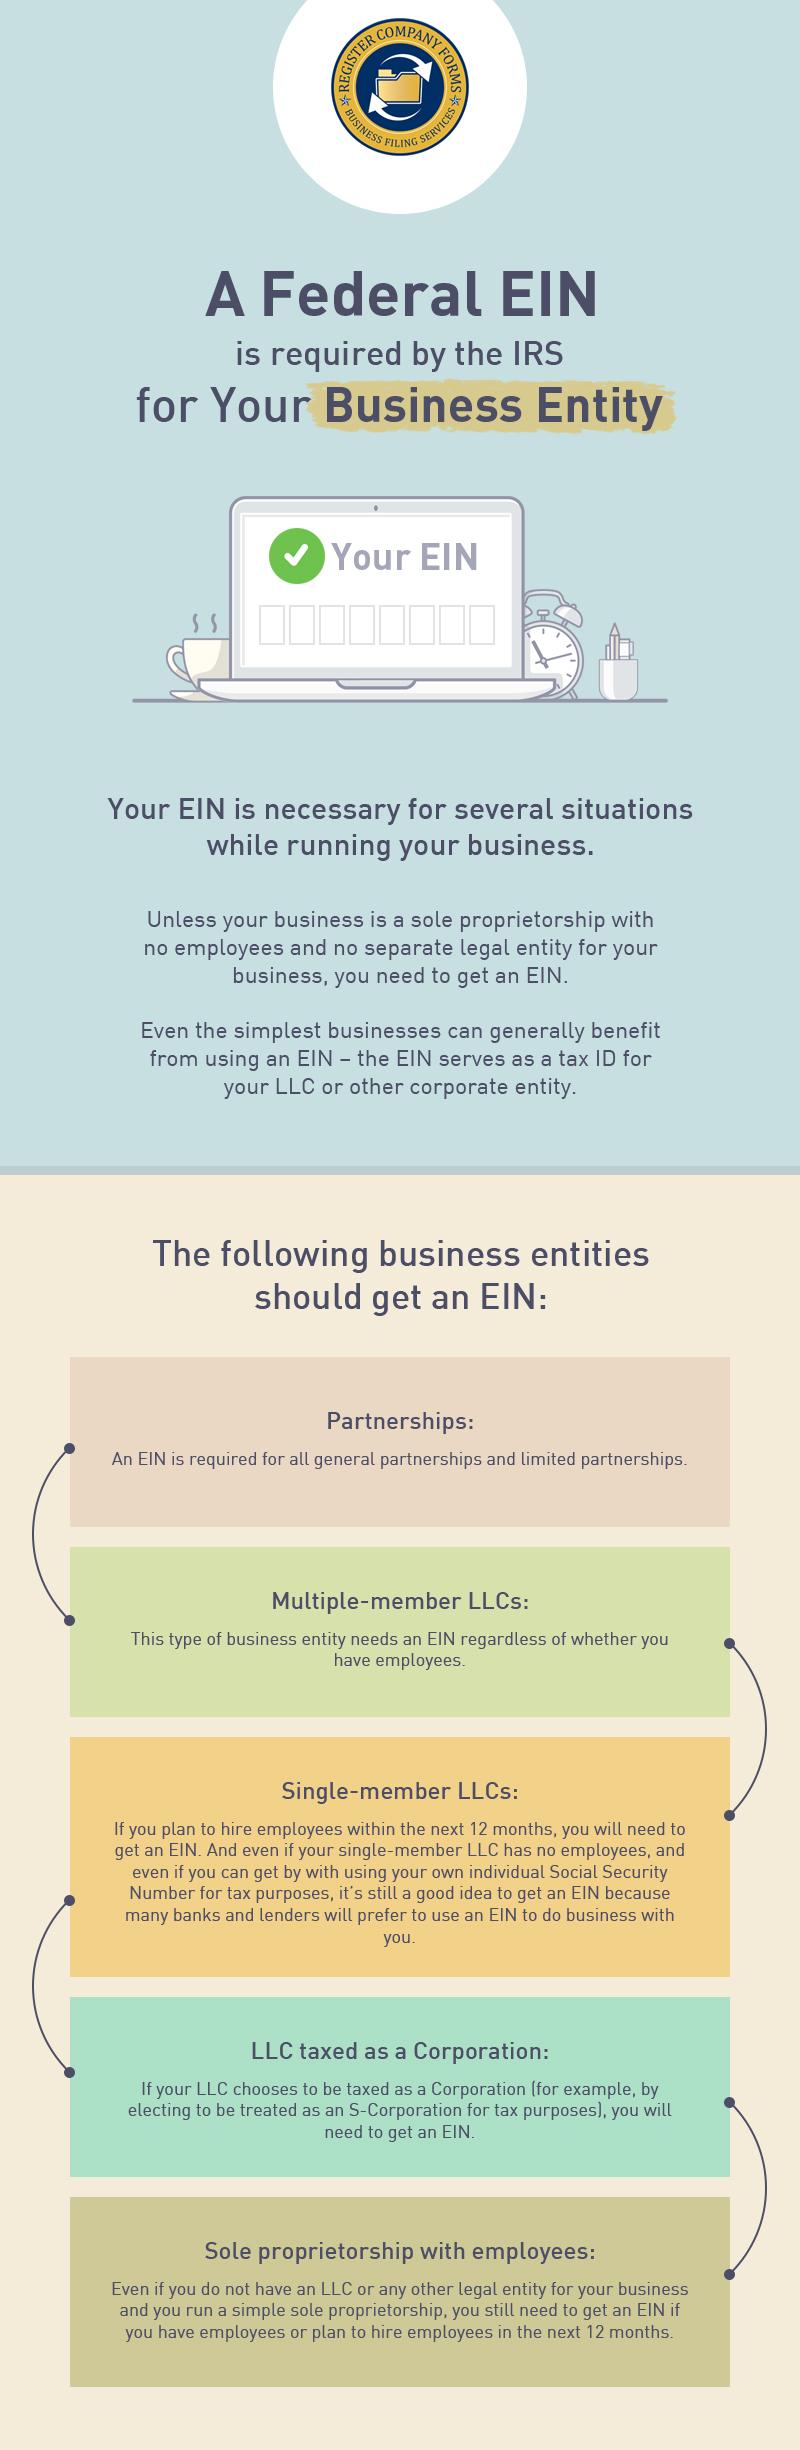 Importance of EIN (Employer Identification Number) for Business Entities